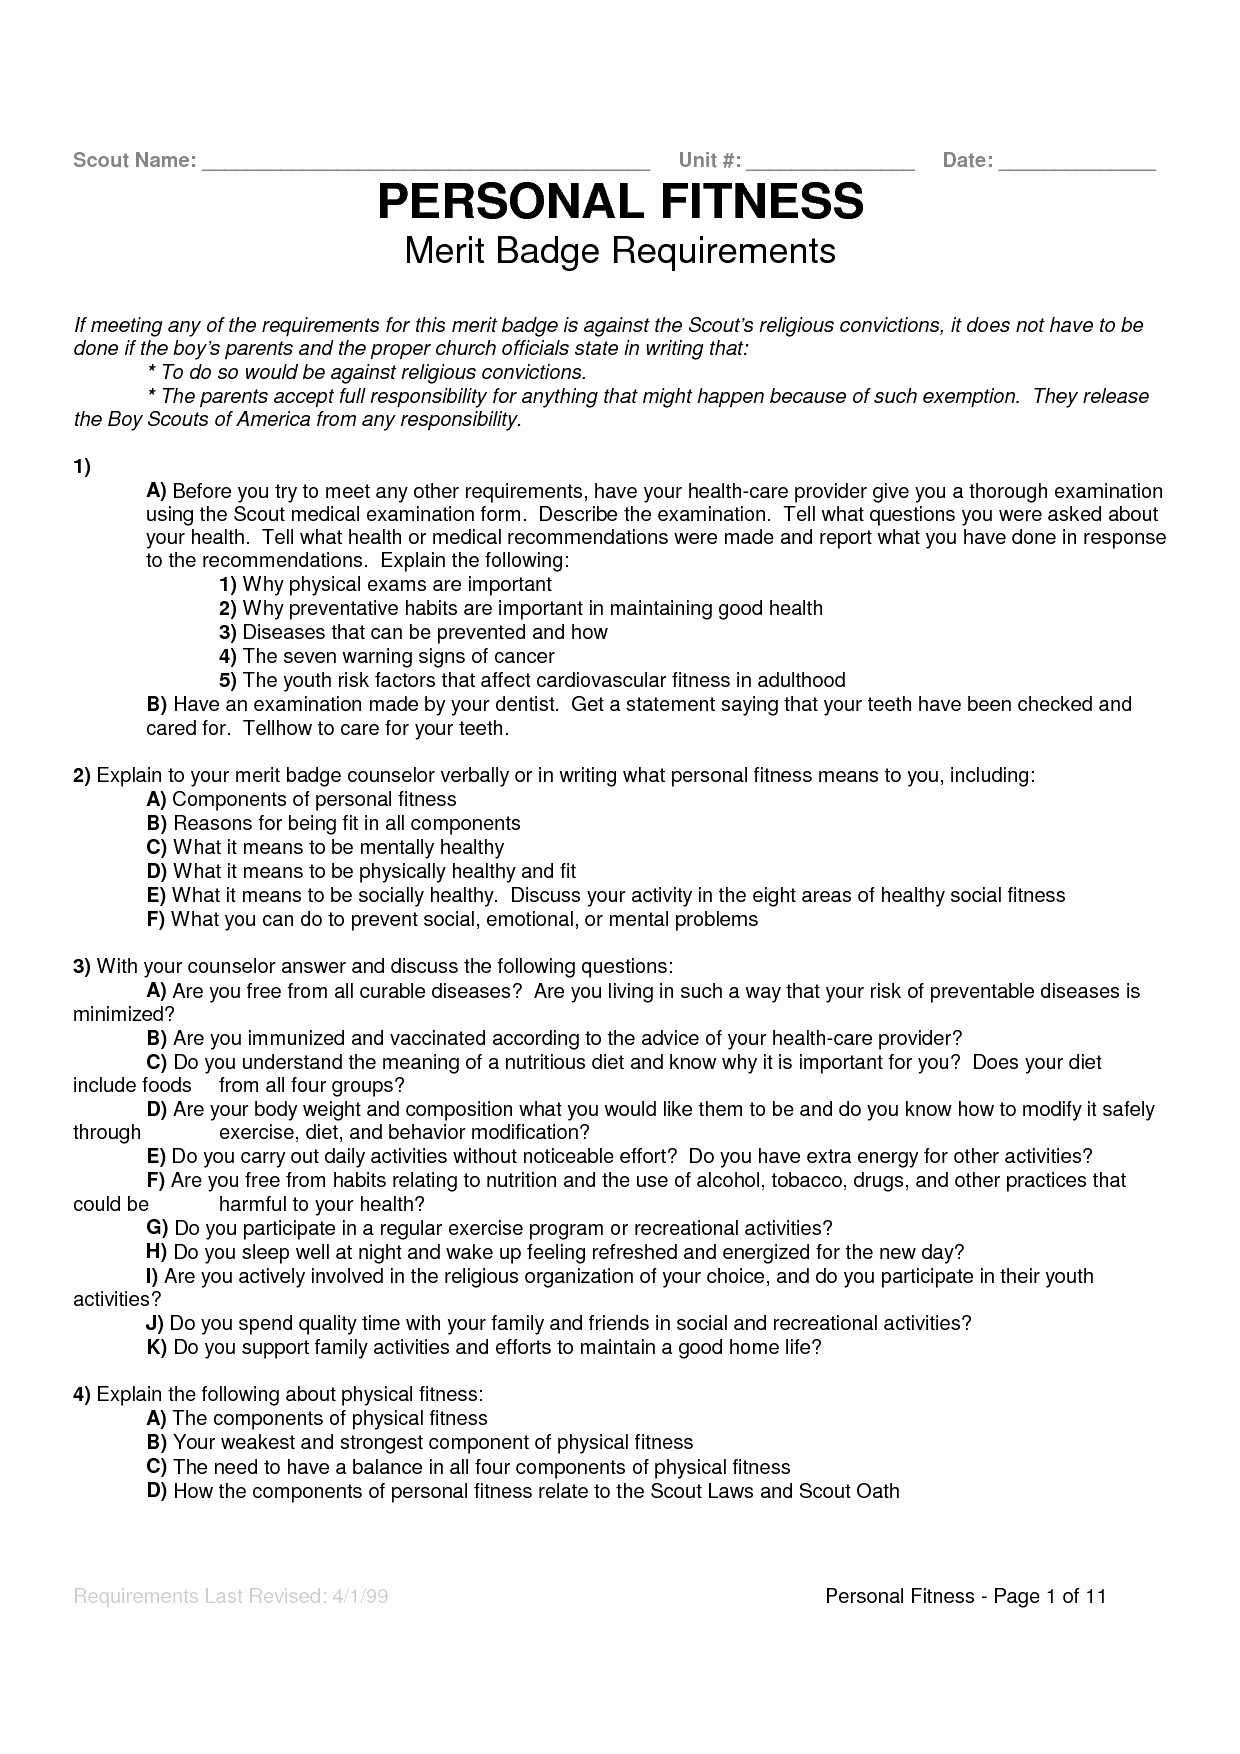 Boy Scout Cooking Merit Badge Worksheet with Personal Management Merit Badge Answers Awesome Tips to Make Boy